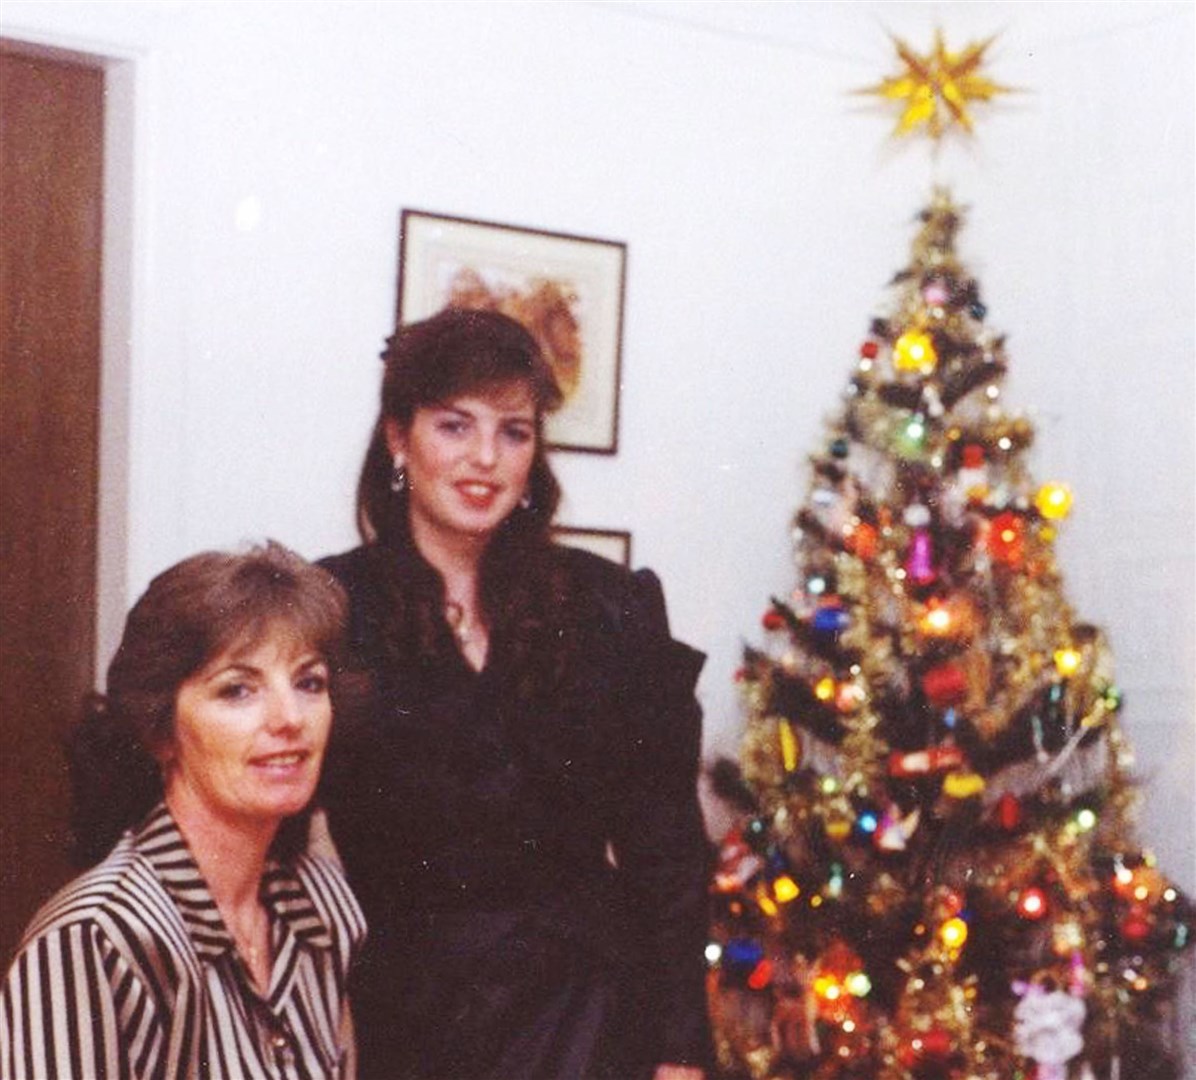 Helen McCourt (right) with her mother Marie McCourt (left)